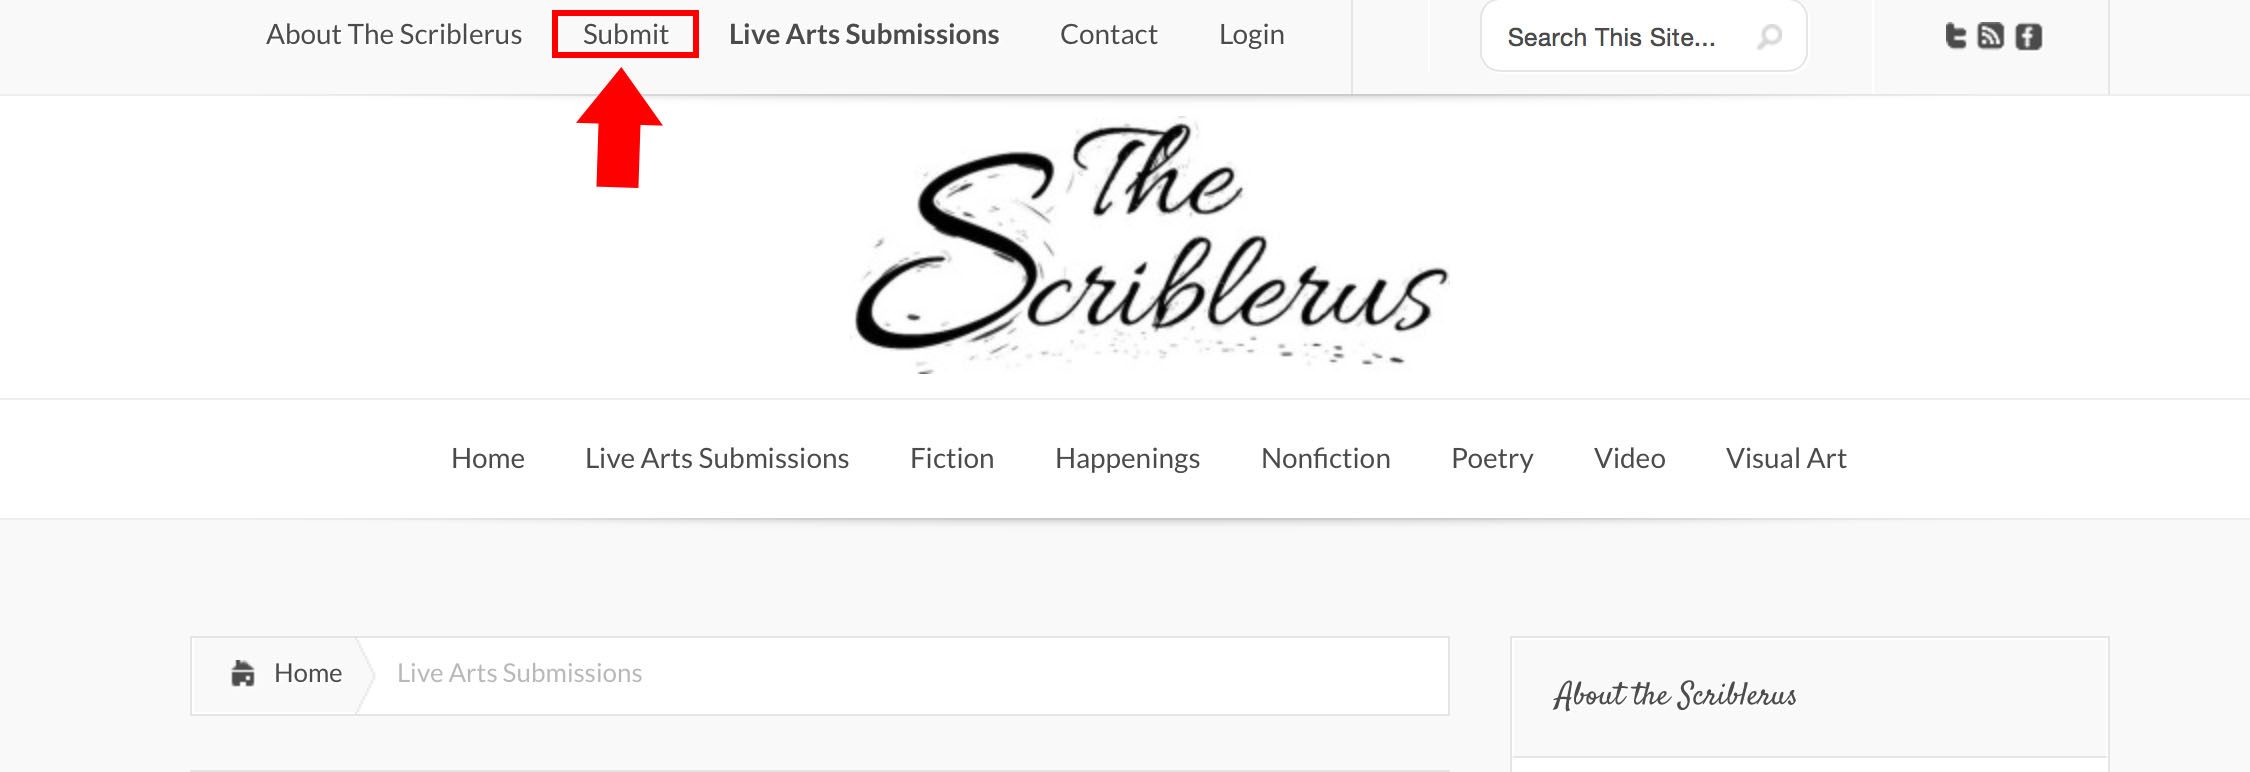 Hit that submit button now! Source:http://thescriblerus.com